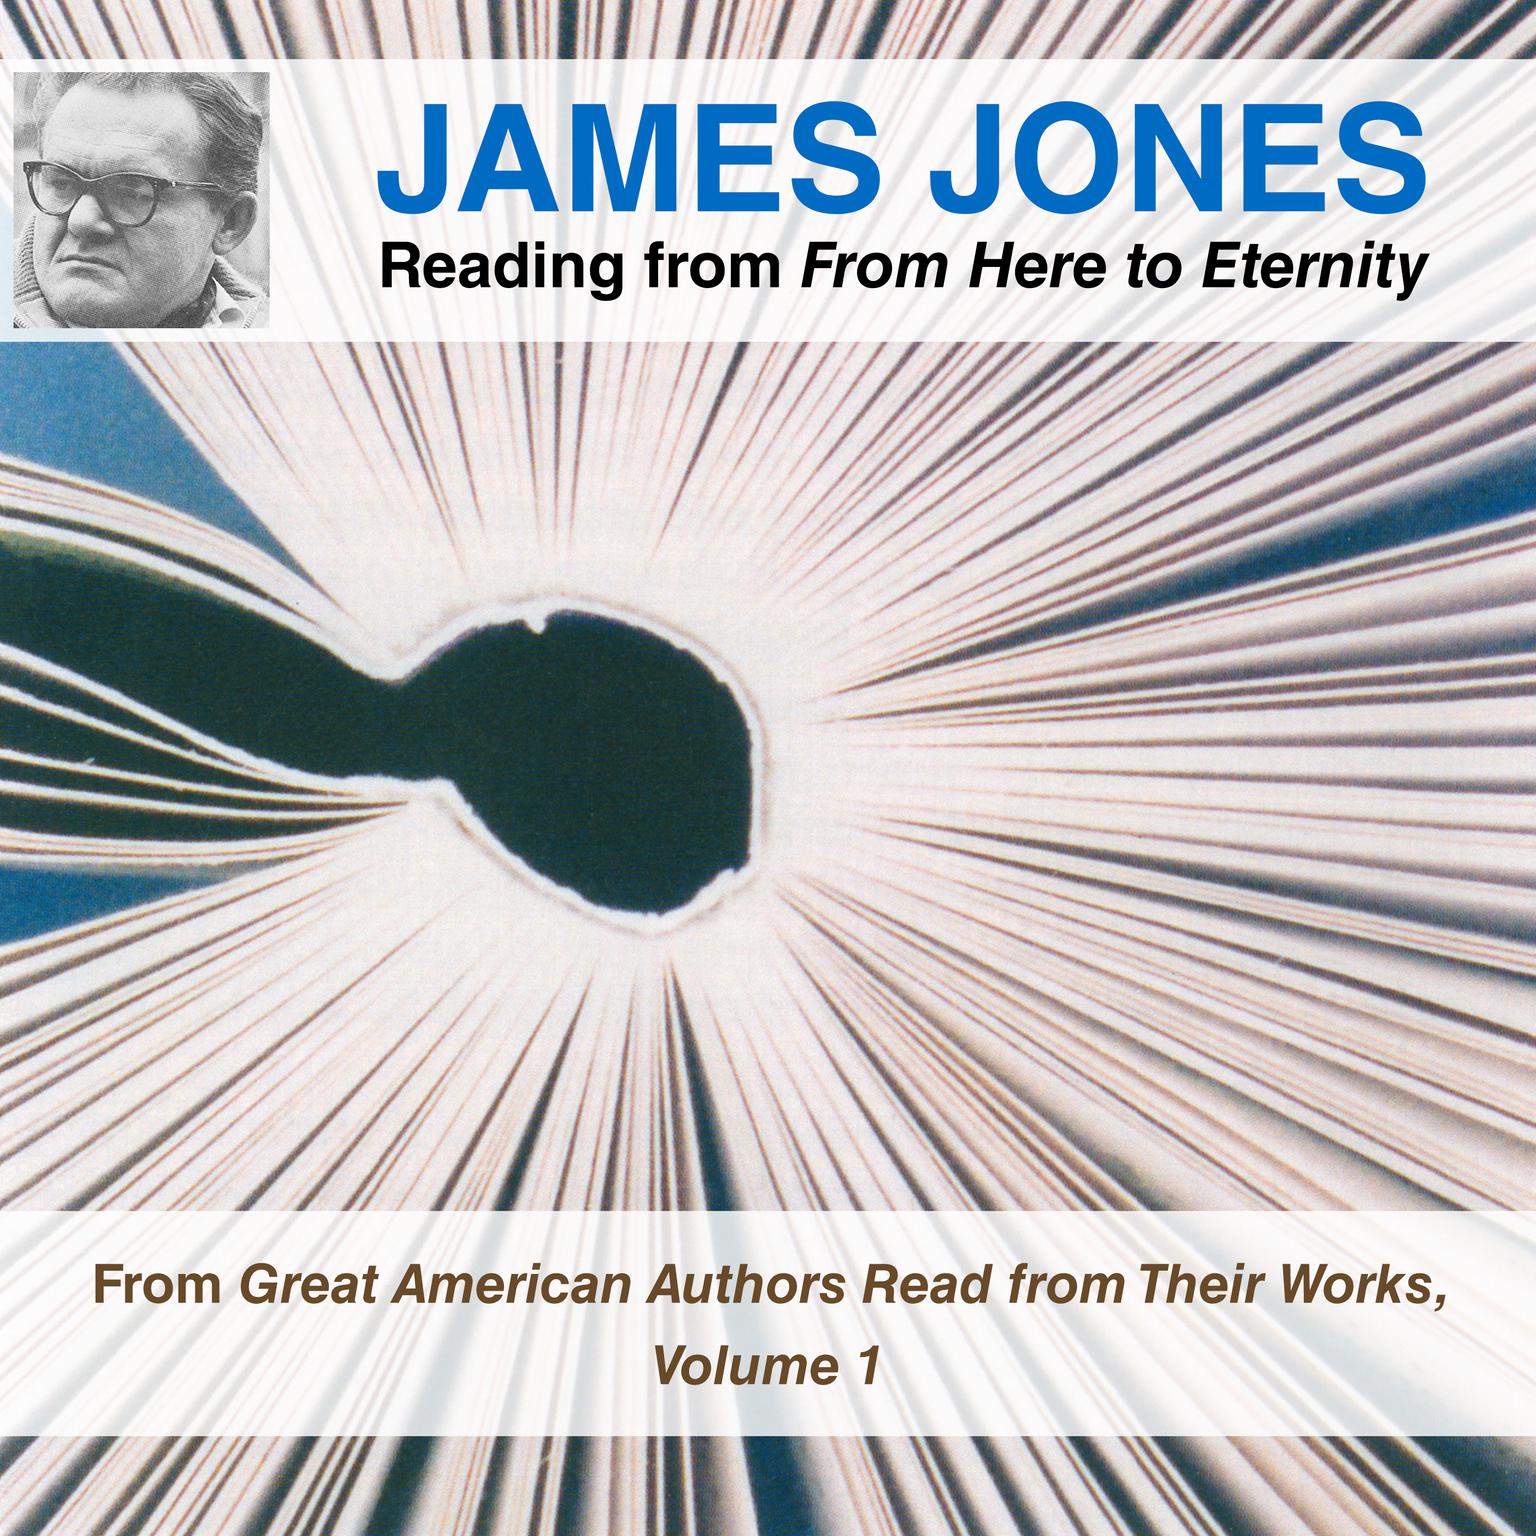 James Jones Reading from From Here to Eternity: From Great American Authors Read from Their Works, Volume 1 Audiobook, by James Jones